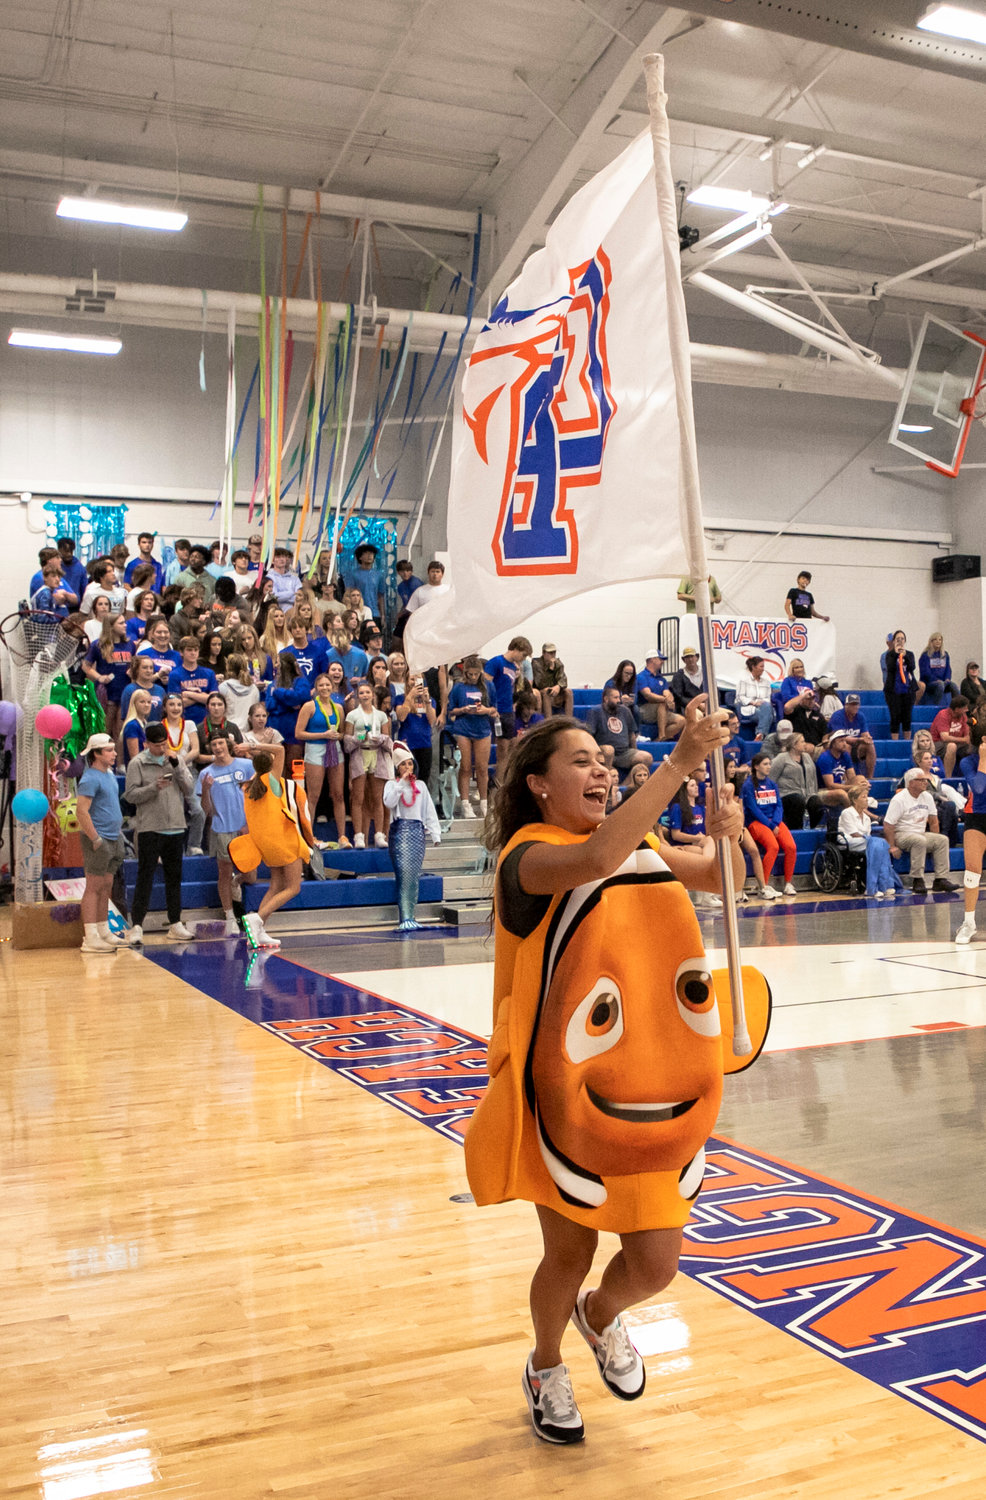 Orange Beach High School hosted Under the Sea night Thursday for the Mako volleyball team’s tri-match with the Curry Yellowjackets and Gulf Shores Dolphins.